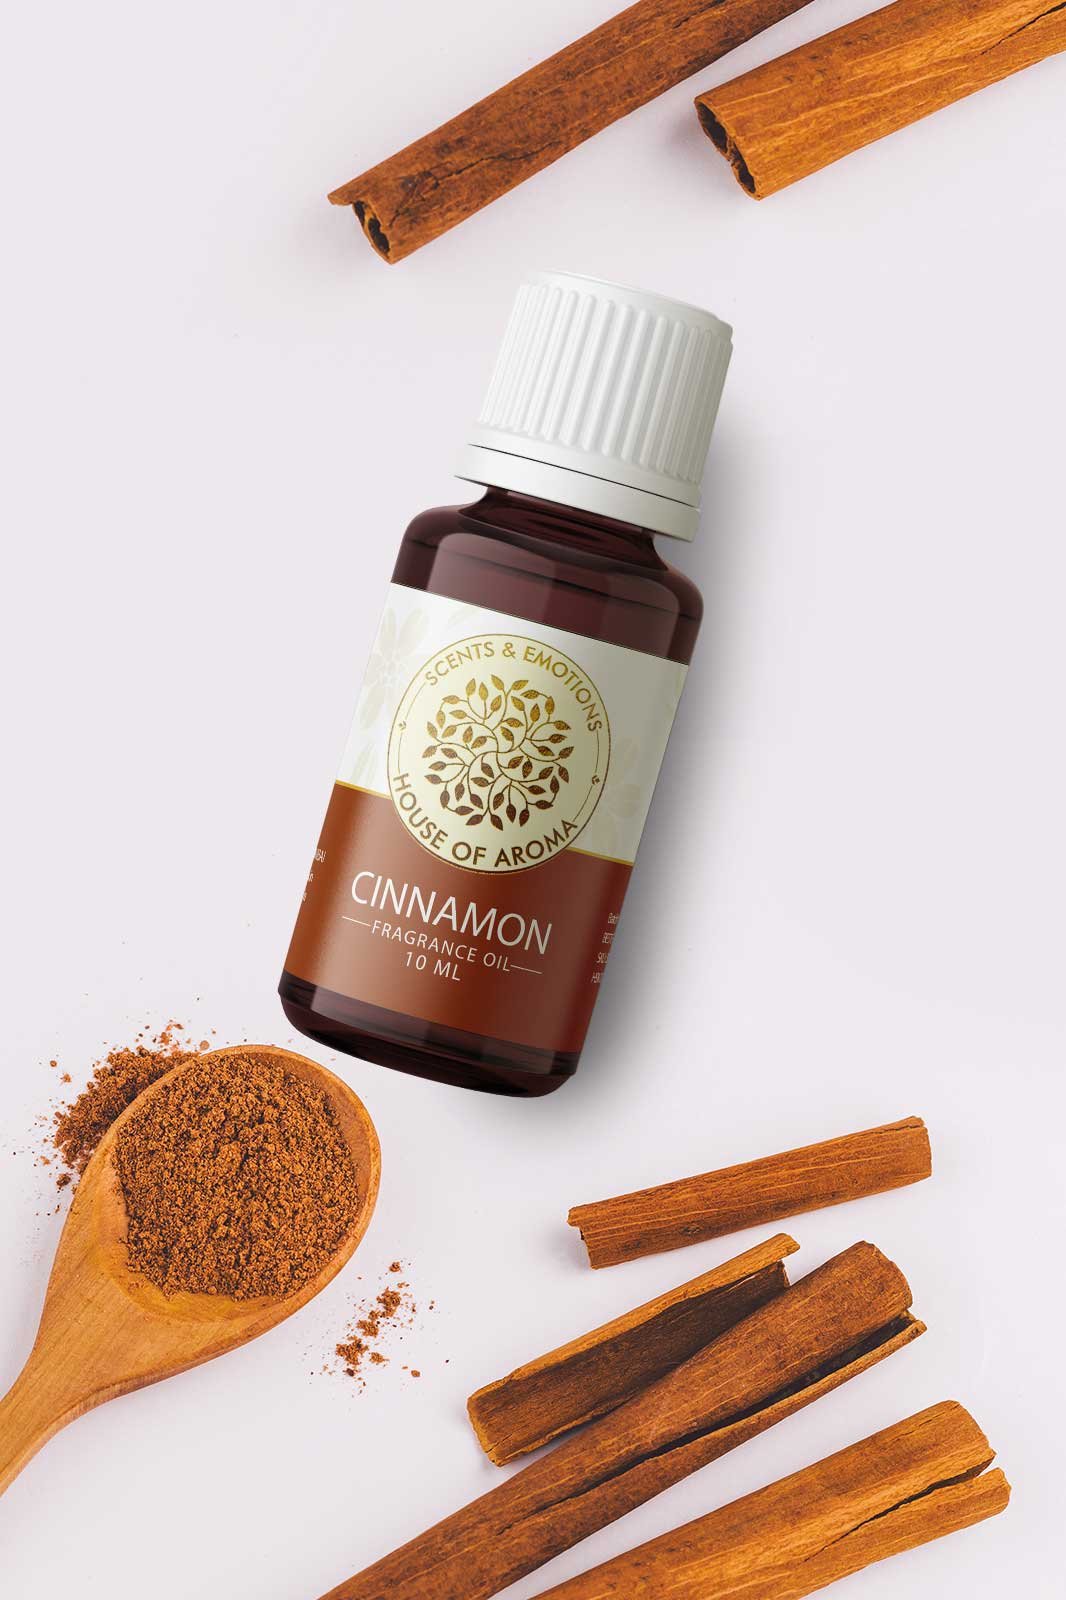 Fragrance Oil, Aroma oil, Synthetic oils, Fragrance oil for candles, oil for diffusers, Aromatic oil, Candle oil, Aromatherapy oil, oil manufacturers, House of Aroma, Cinnamon Fragrance Oil, cinnamon fragrance brand, cinnamon spice fragrance oil, cinnamon scented oil, cinnamon clove oil, cinnamon oil, spicy flavour aroma oil, cinnamon scented oil